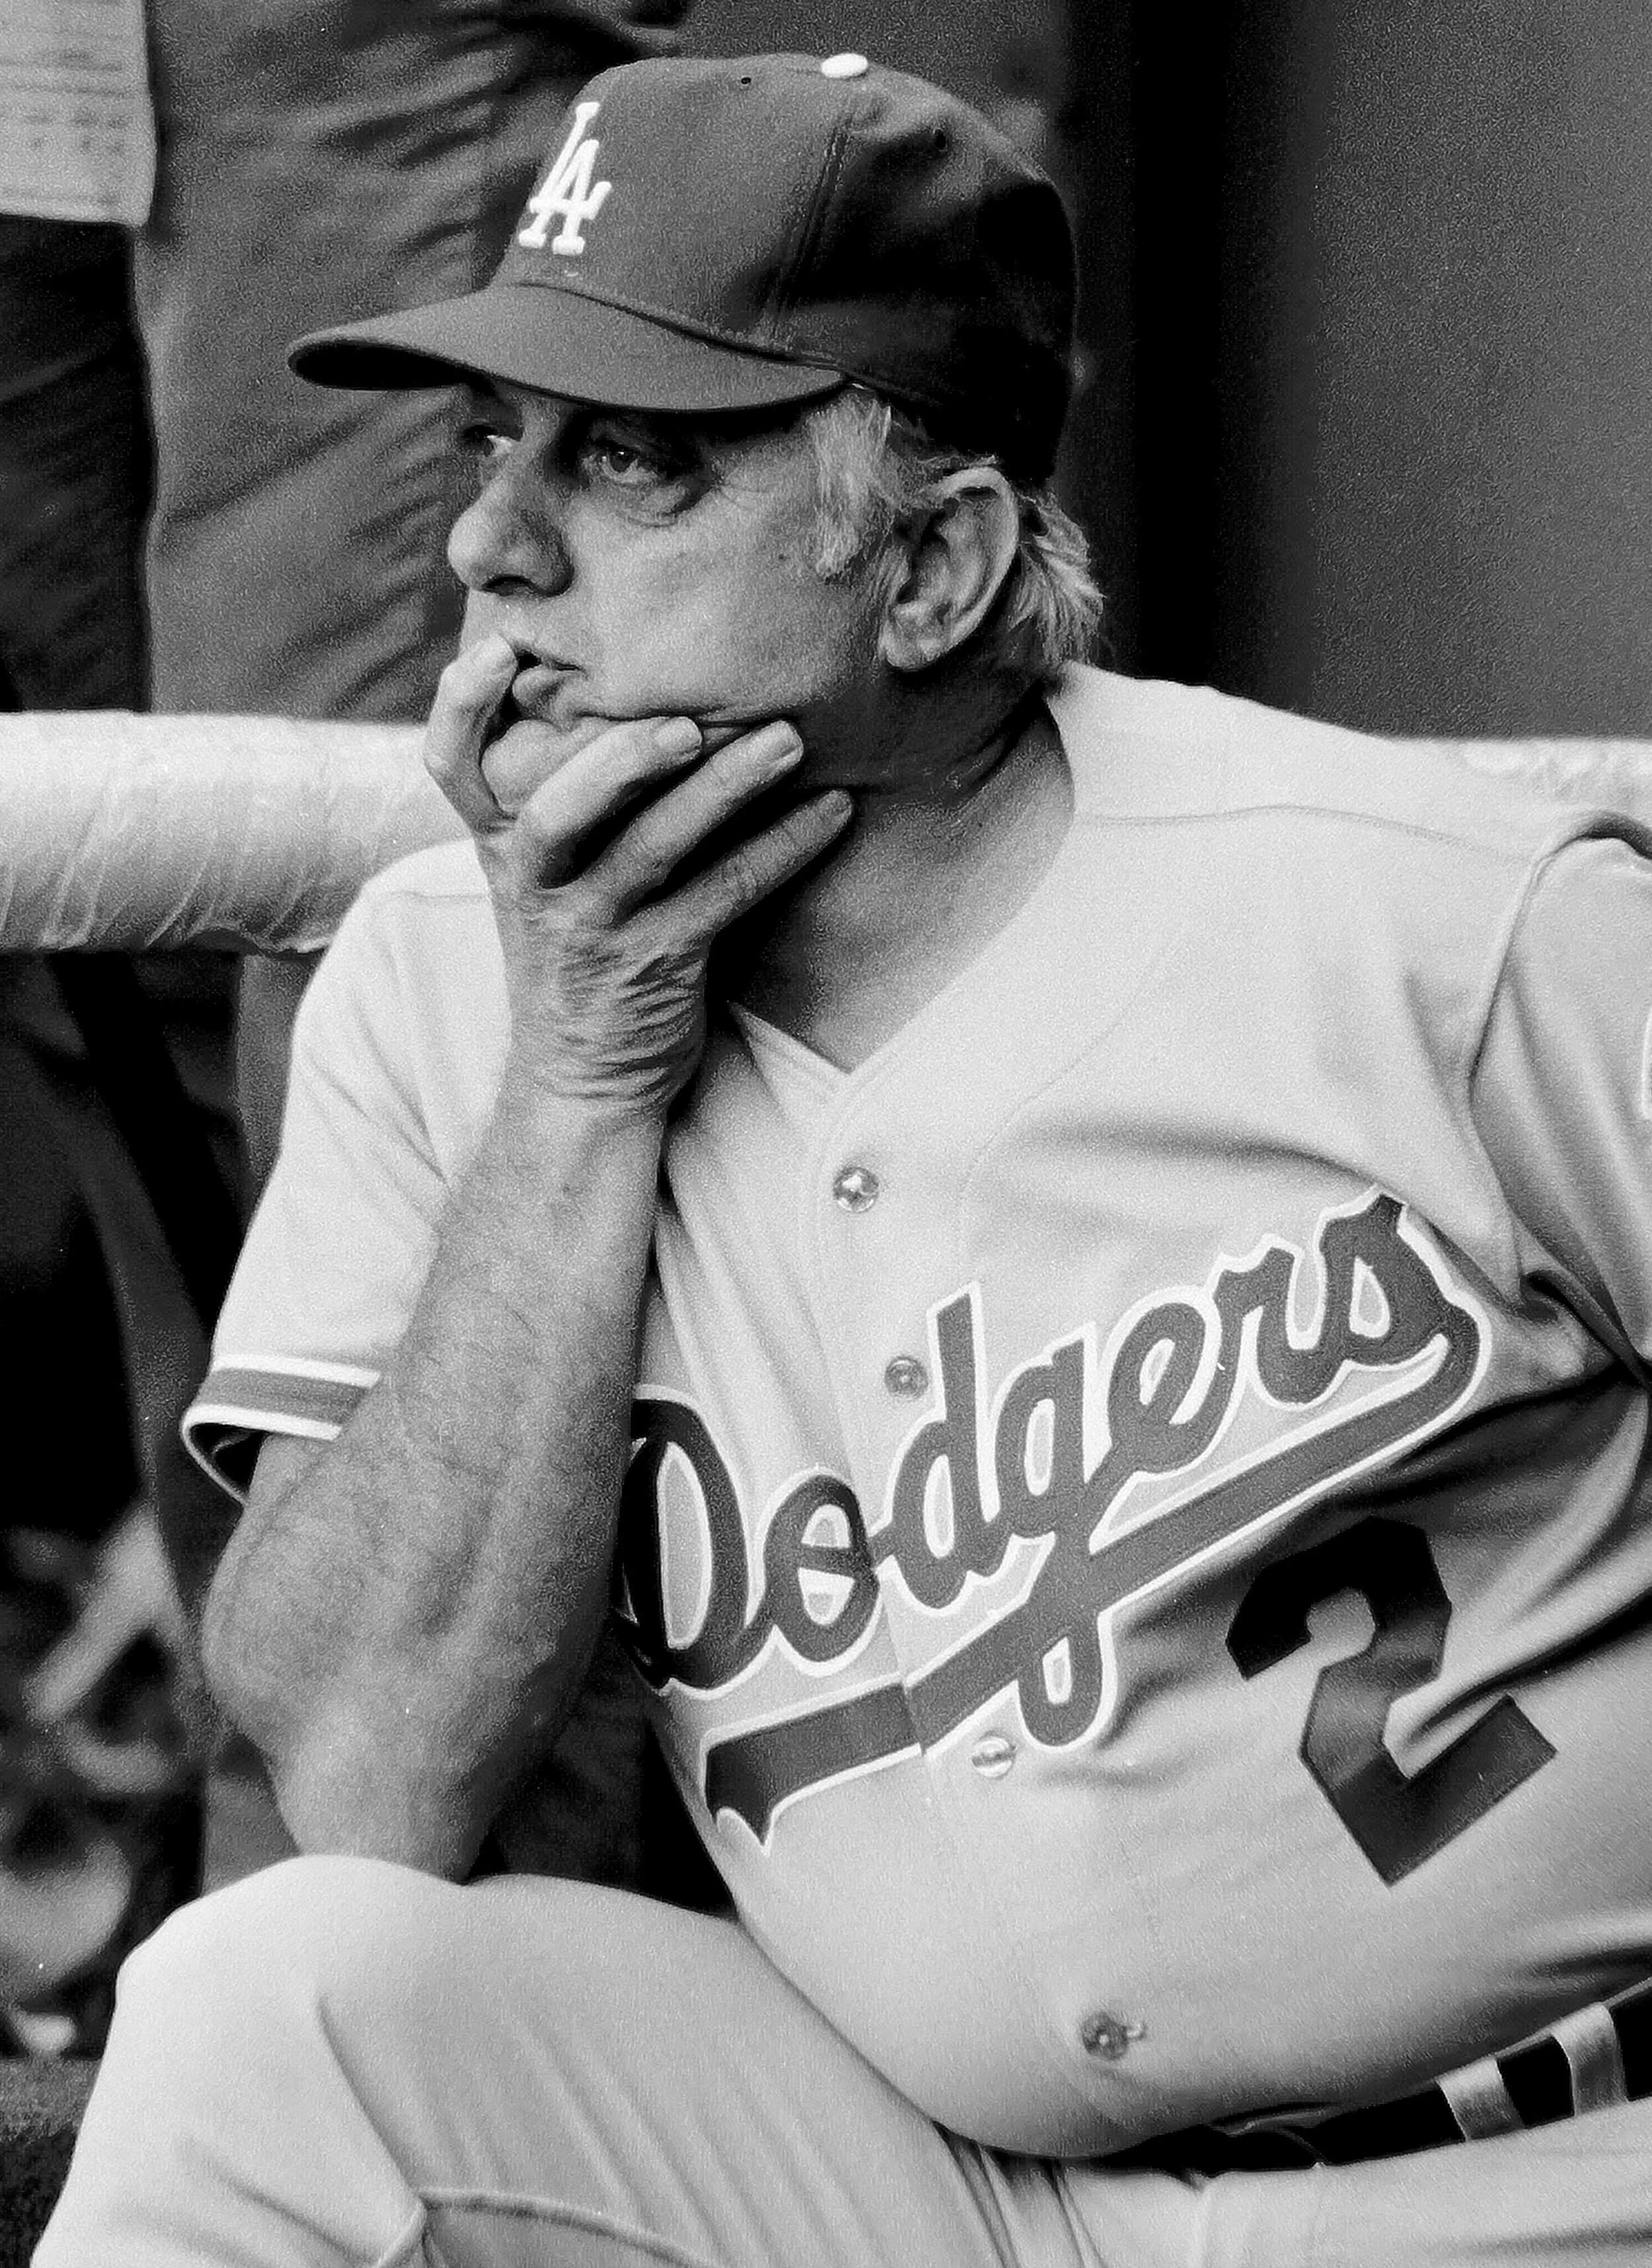  LOS ANGELES, CA - 1981:  Tommy Lasorda #2, manager of the Los Angeles Dodgers, sits in the dugout during a game at Dodger Stadium, Los Angeles, California. (Photo by Jayne Kamin-Oncea/Getty Images) 